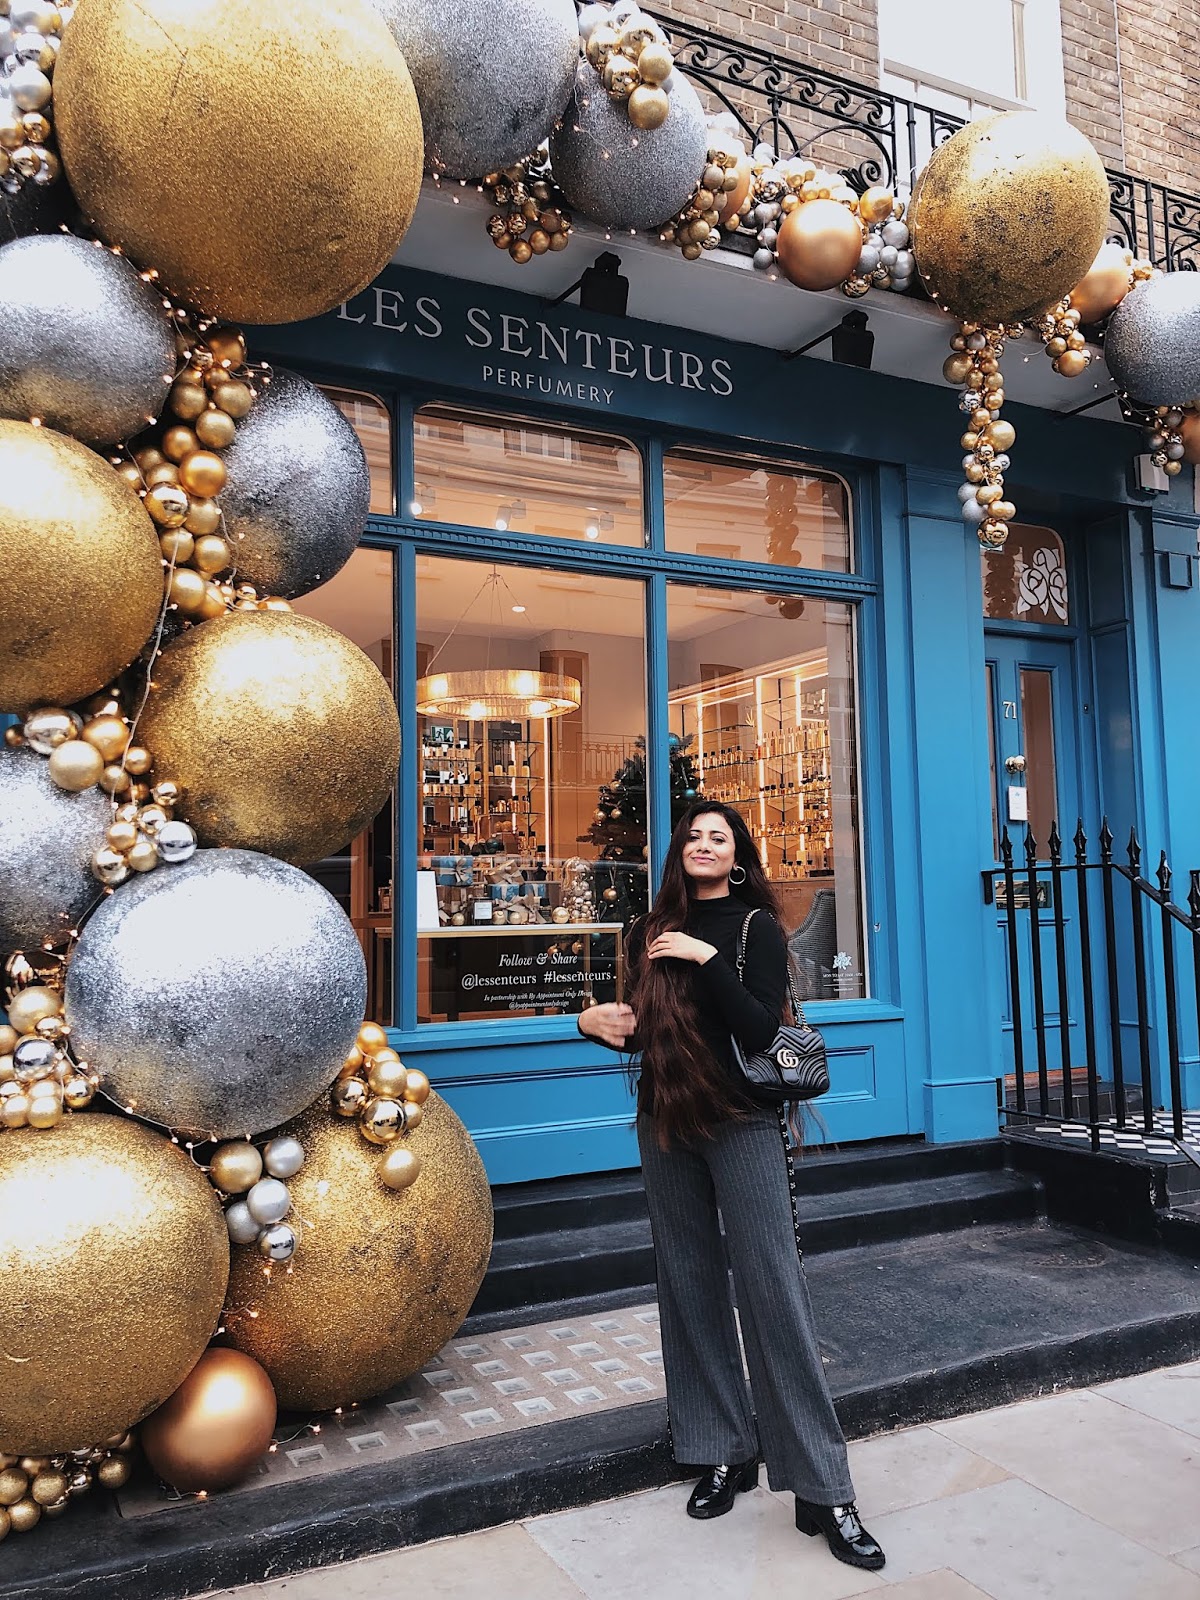 christmas in london, christmas decoration in london, christmas 2018, christmas decoration london 2018, indian blogger, london blogger, belgravia london, belgravia christmas decoration, le senteurs elizabeth street, elizabeth street london